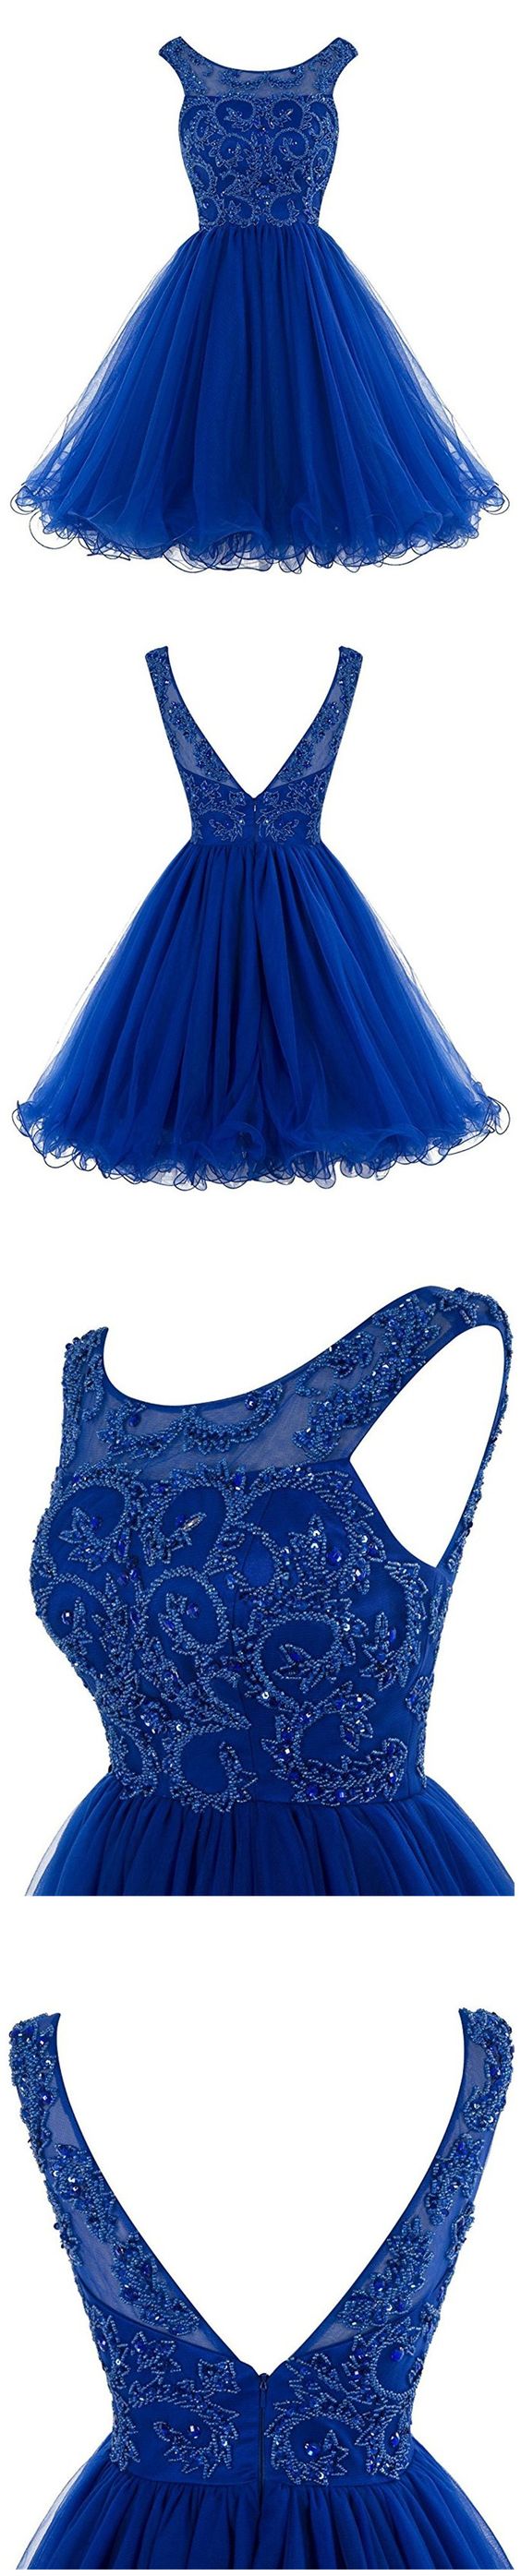 Royal Blue Short Homecoming Dresses,tulle Short Prom Dresses,beading V Back Homecoming Dresses